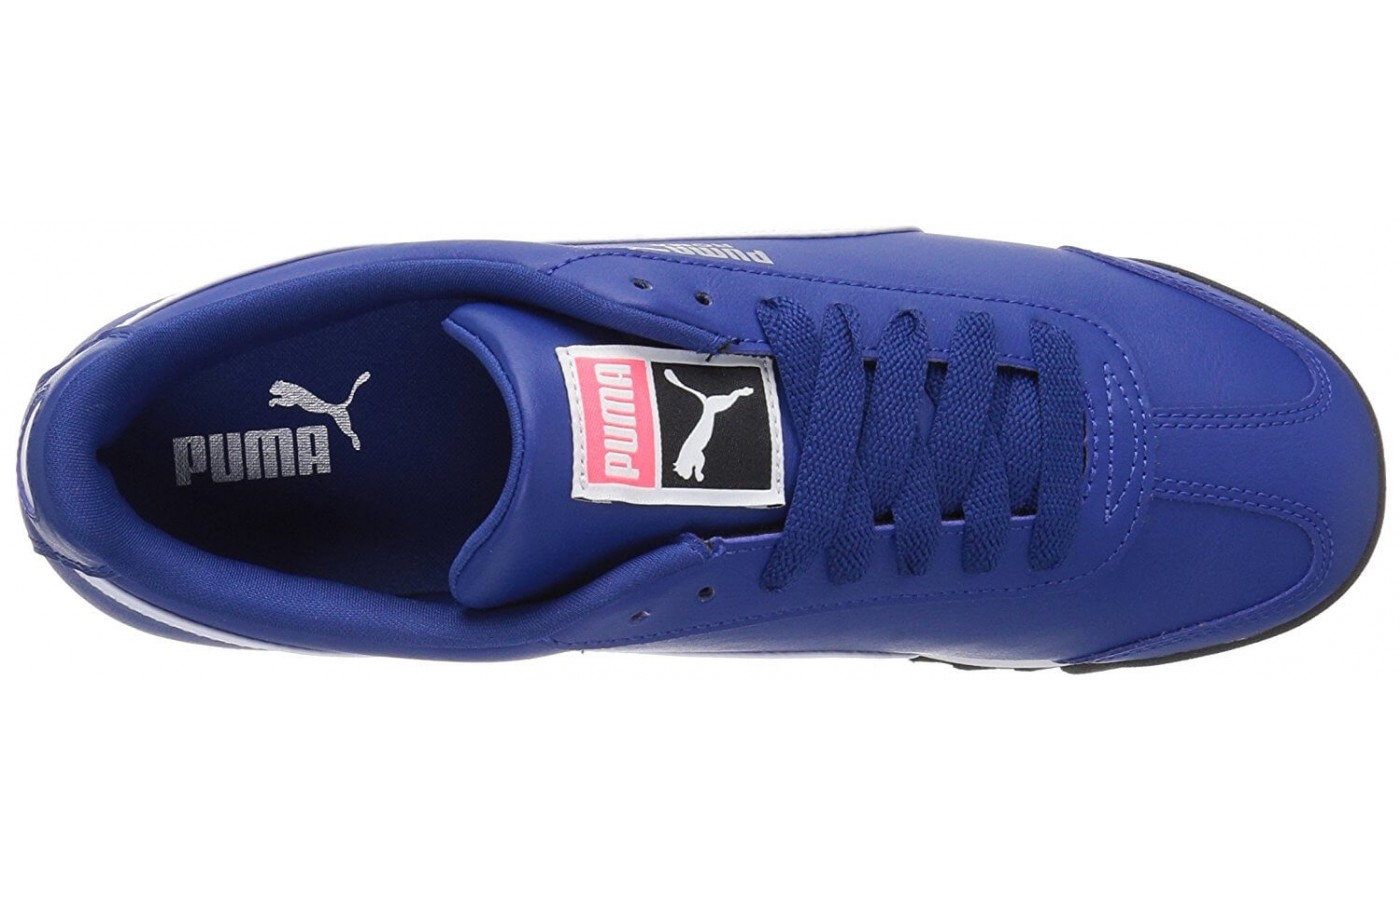 The Puma Roma features traditional laces